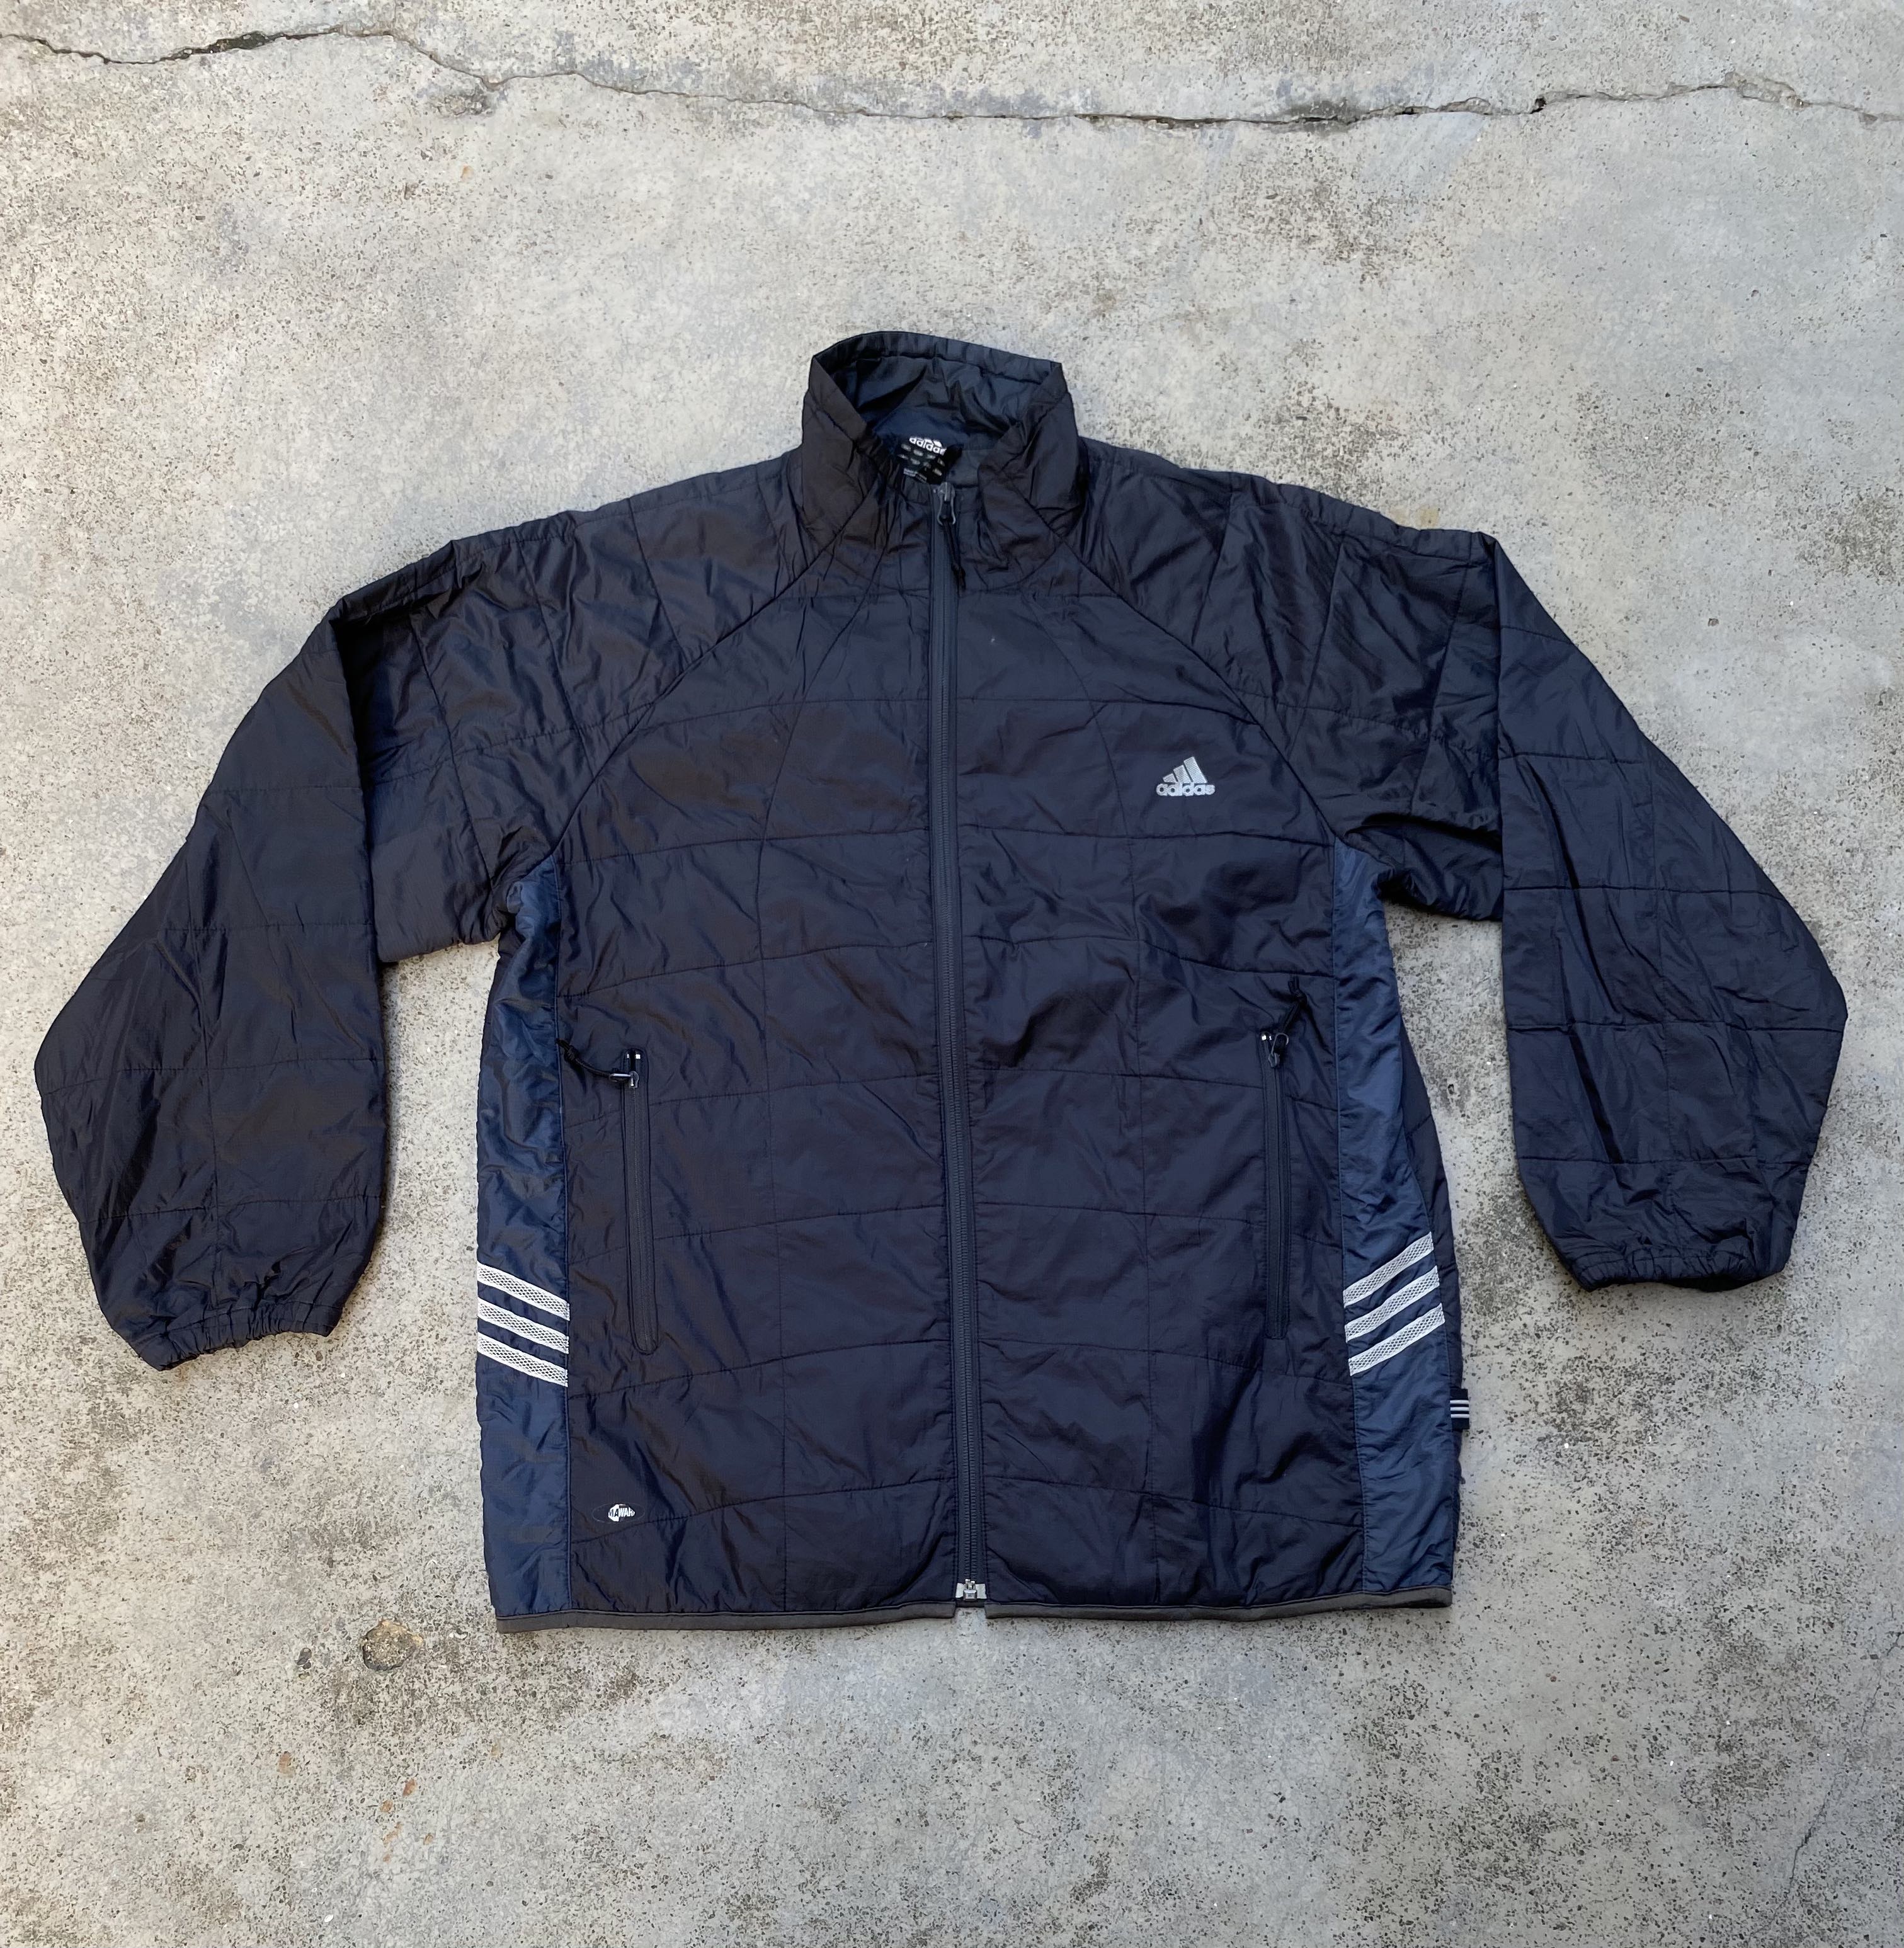 Adidas down jacket, Men's Fashion, Coats, Jackets and Outerwear on ...